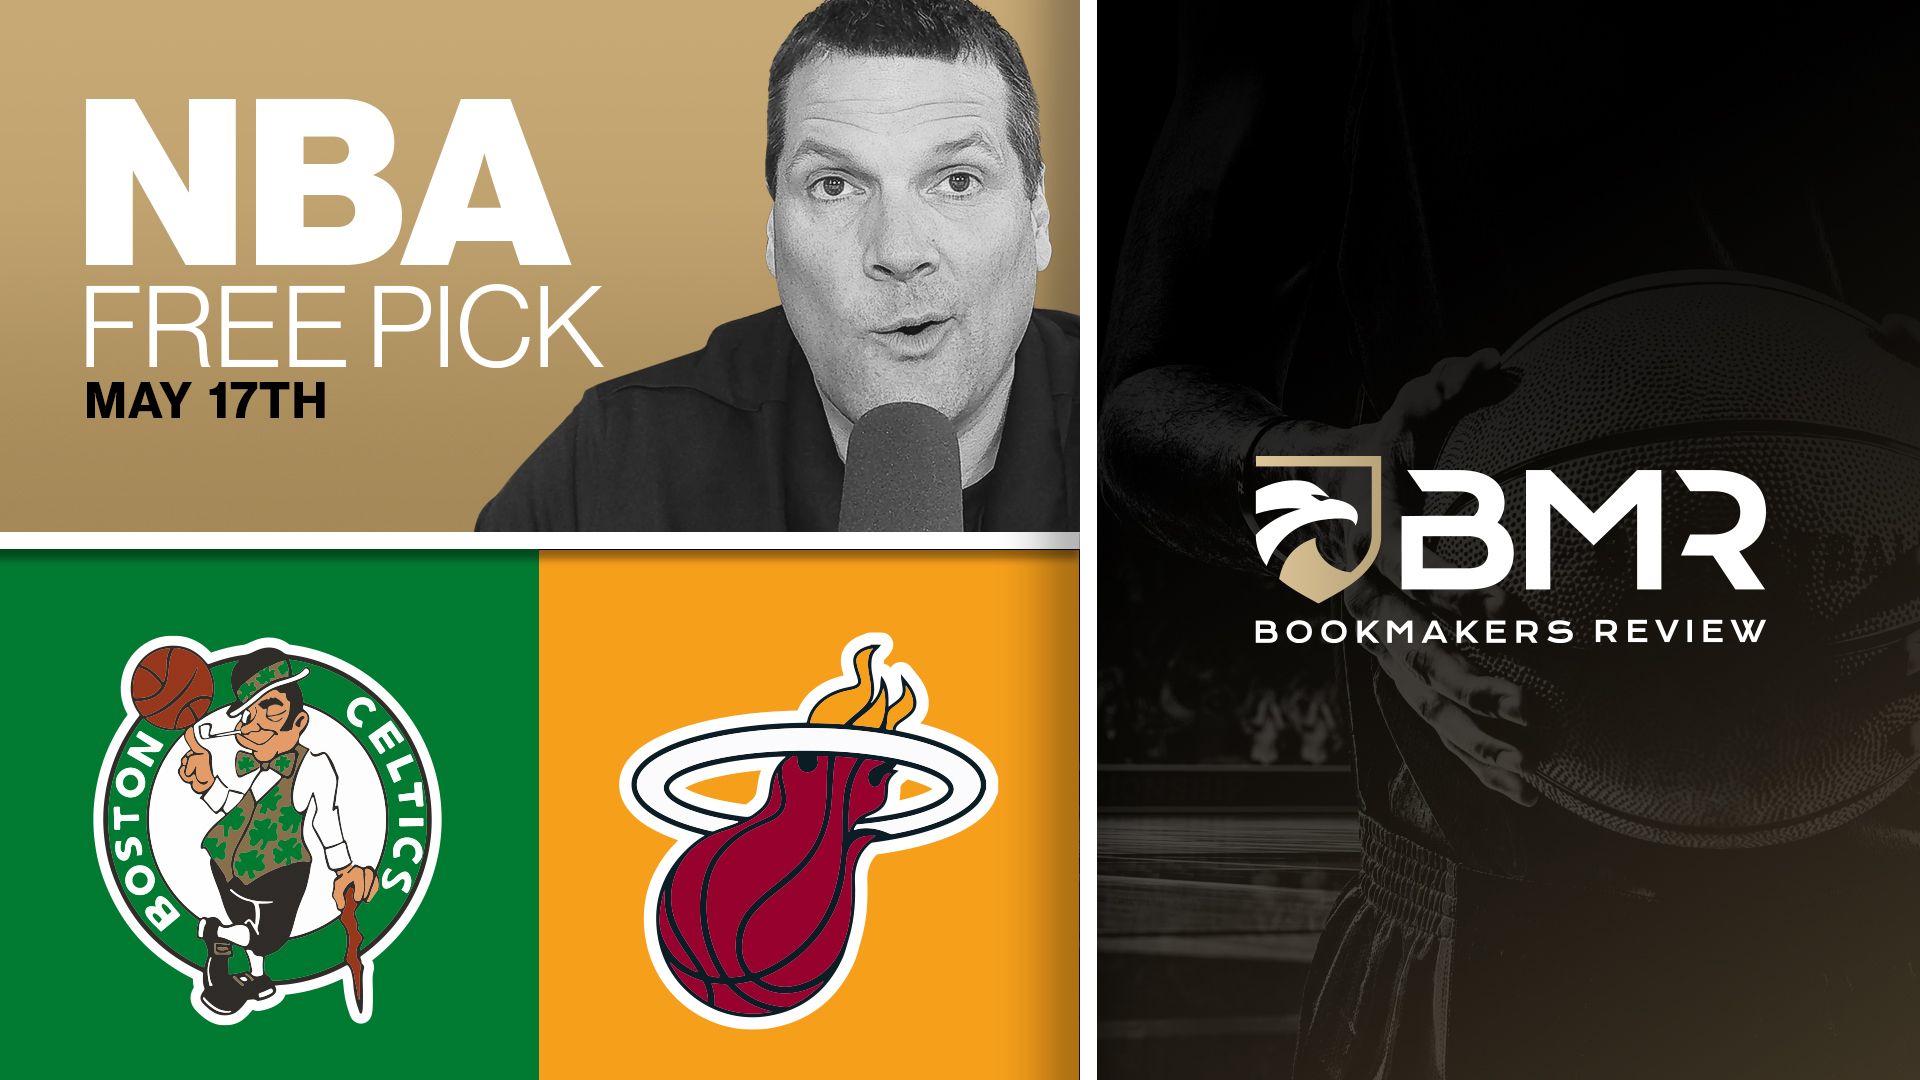 Celtics vs. Heat | Free NBA Playoffs Pick by Donnie RightSide &#8211; May 17th